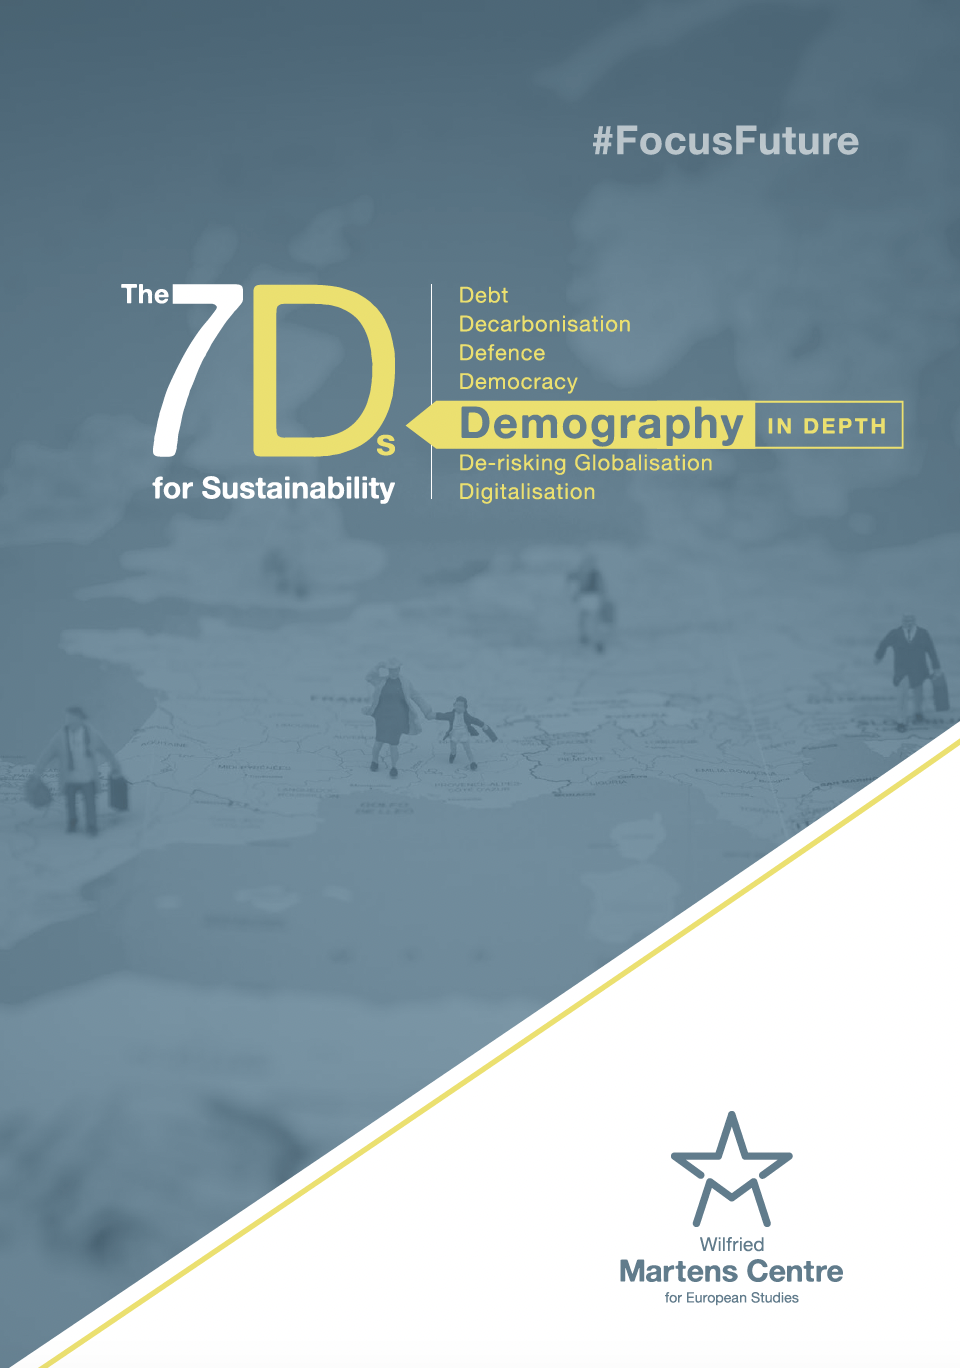 The 7Ds – Demography in Depth